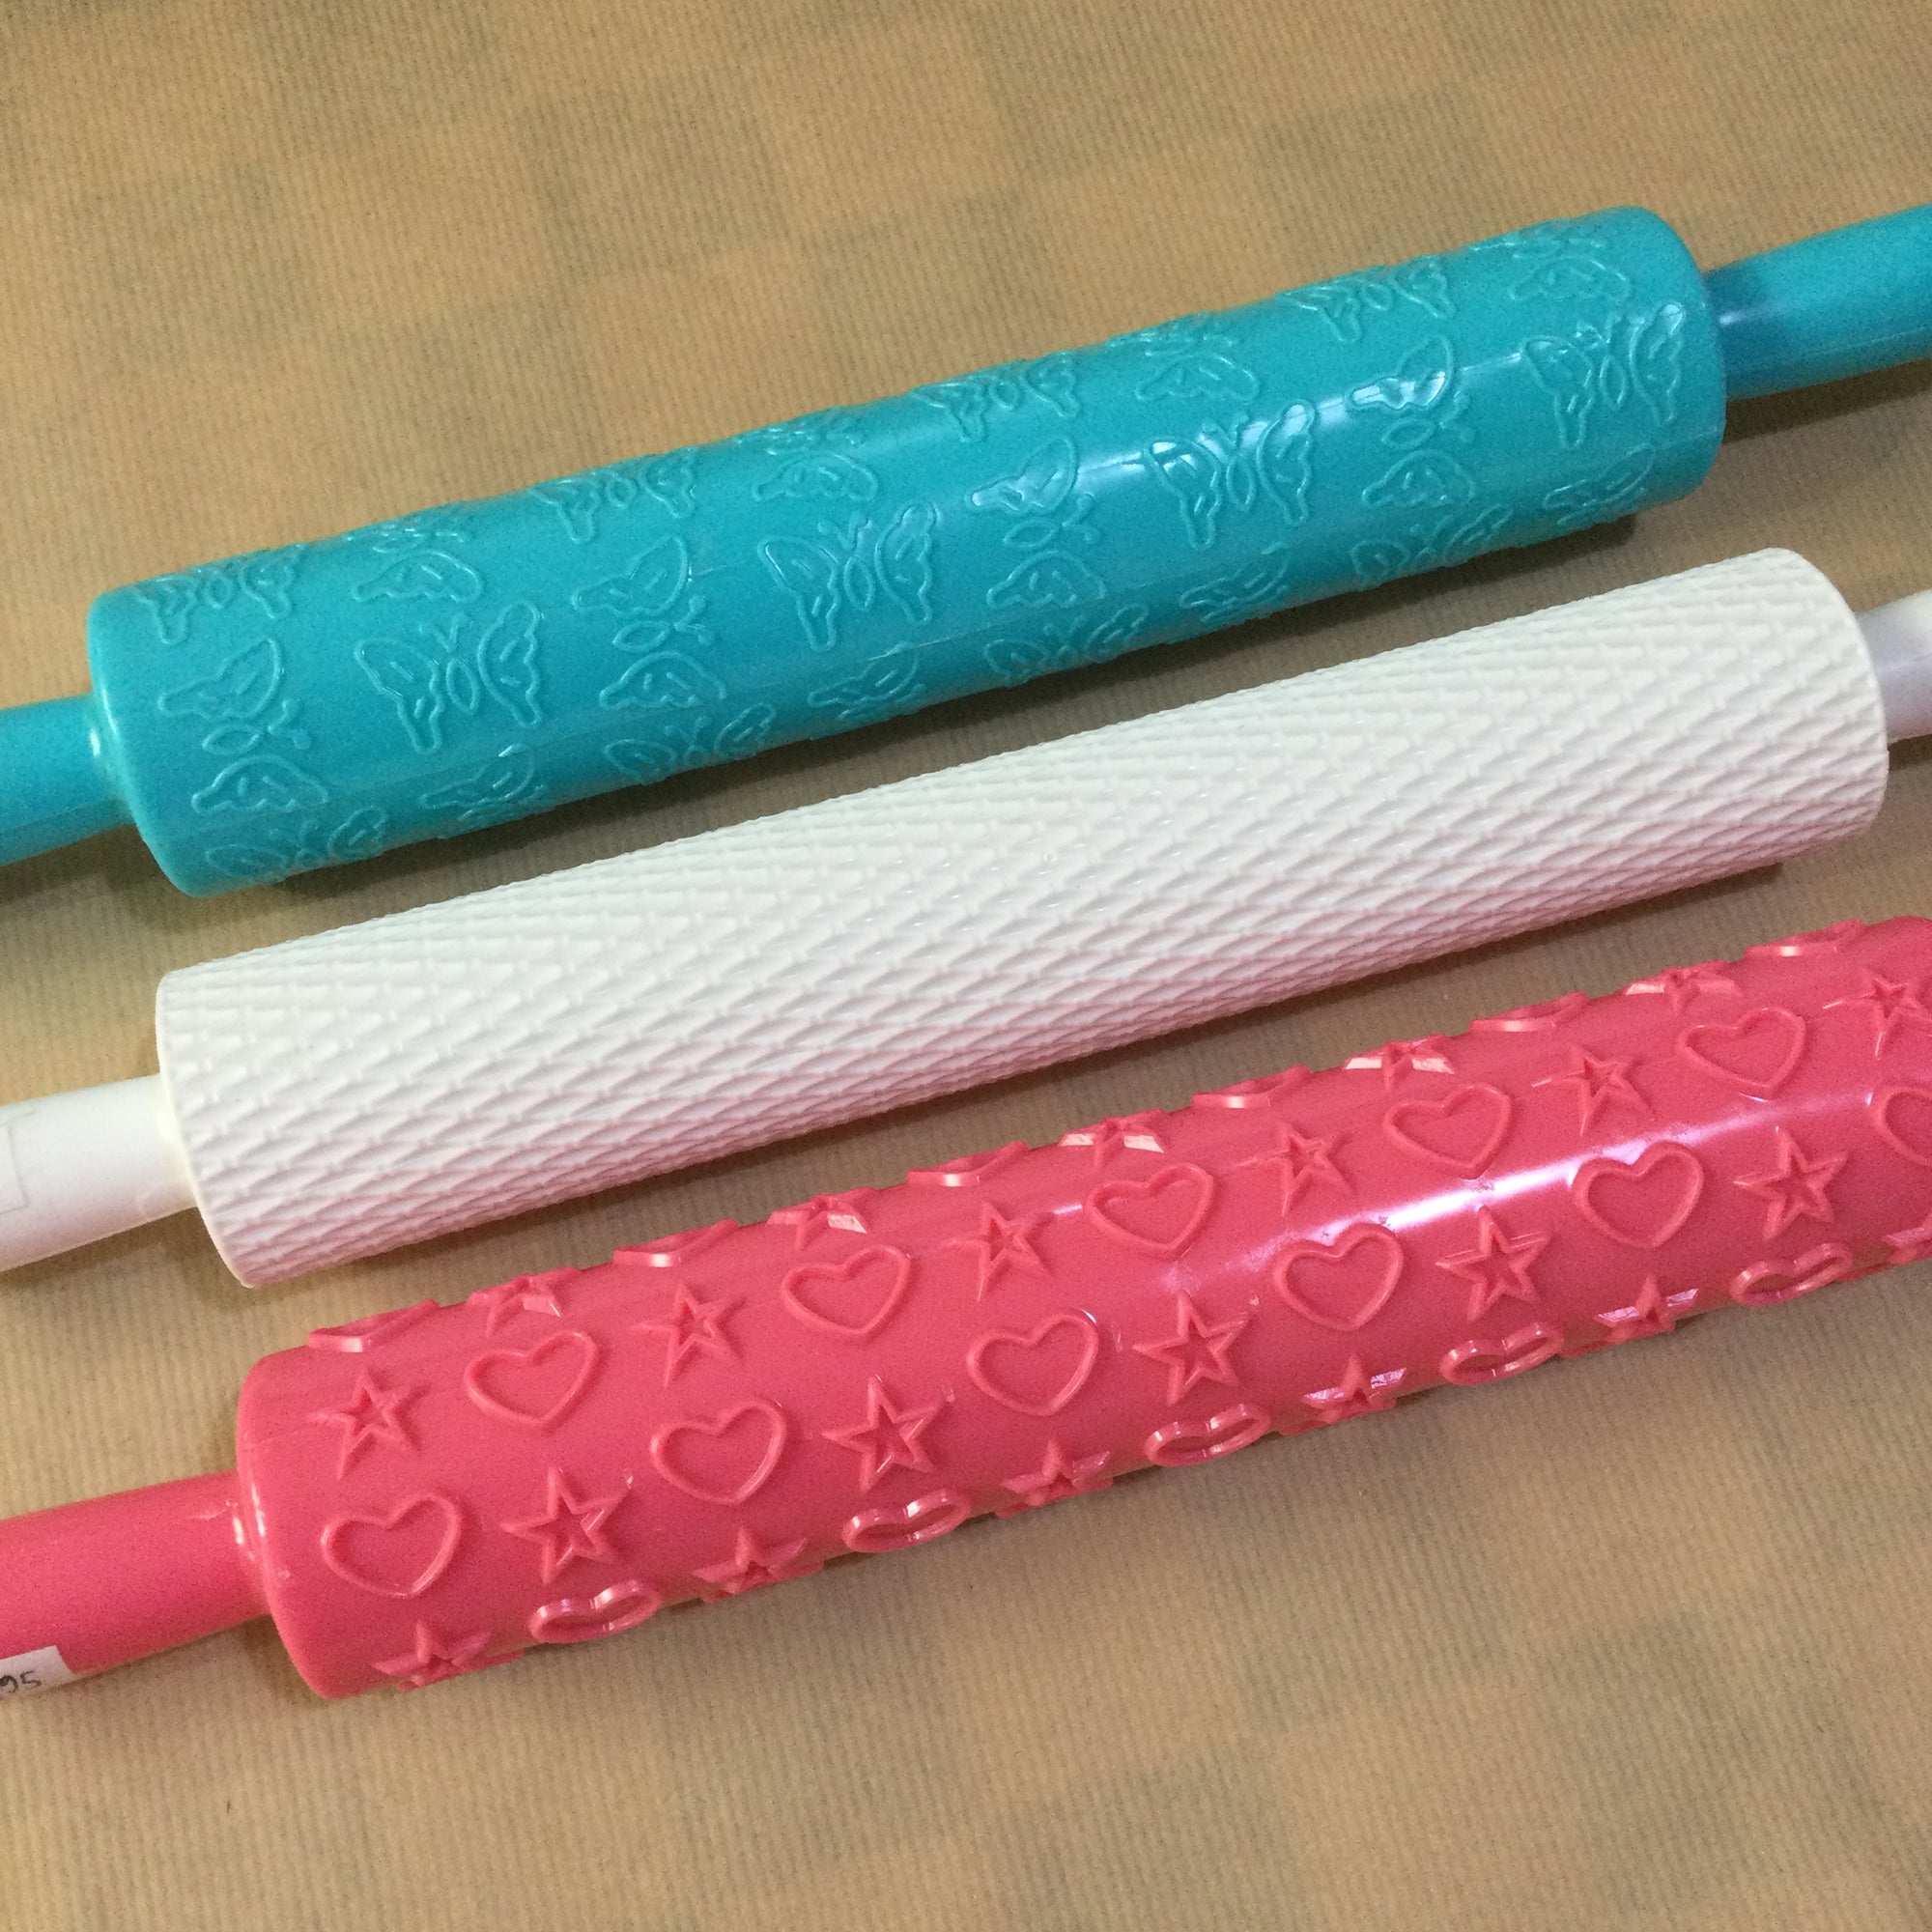 Large Patterned Rollers Rolling Pin